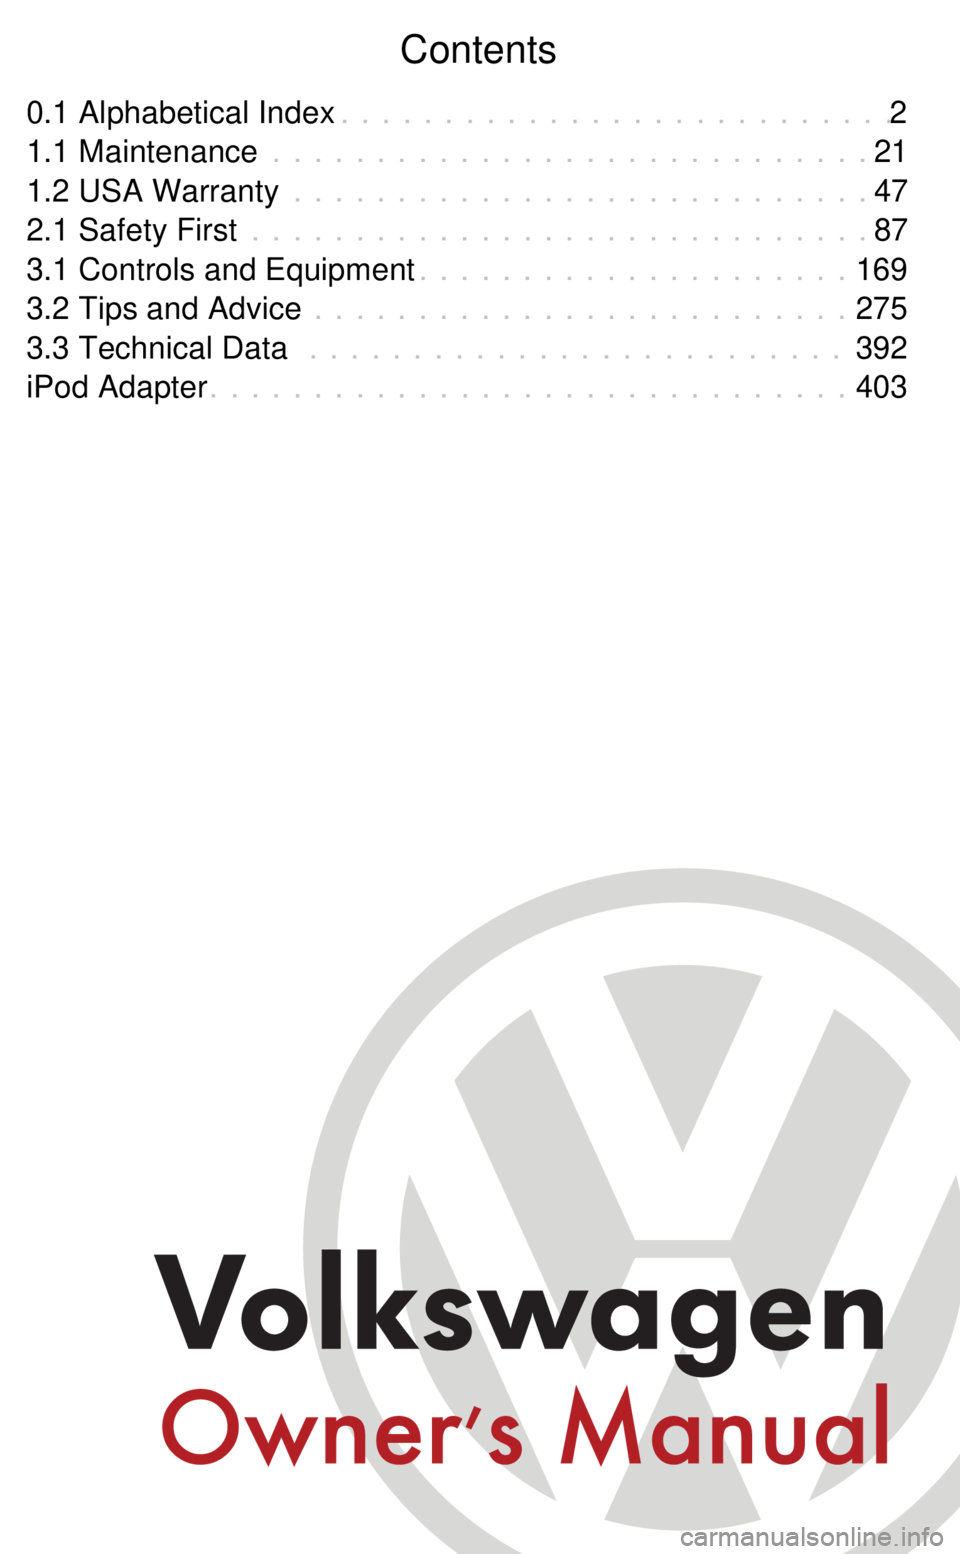 VOLKSWAGEN GOLF MK5 2006  Owners Manual Contents
0.1 Alphabetical Index 2
. . . . . . . . . . . . . . . . . . . . . . . . . . .
1.1 Maintenance 21
. . . . . . . . . . . . . . . . . . . . . . . . . . . . .
1.2 USA Warranty 47
. . . . . . . .